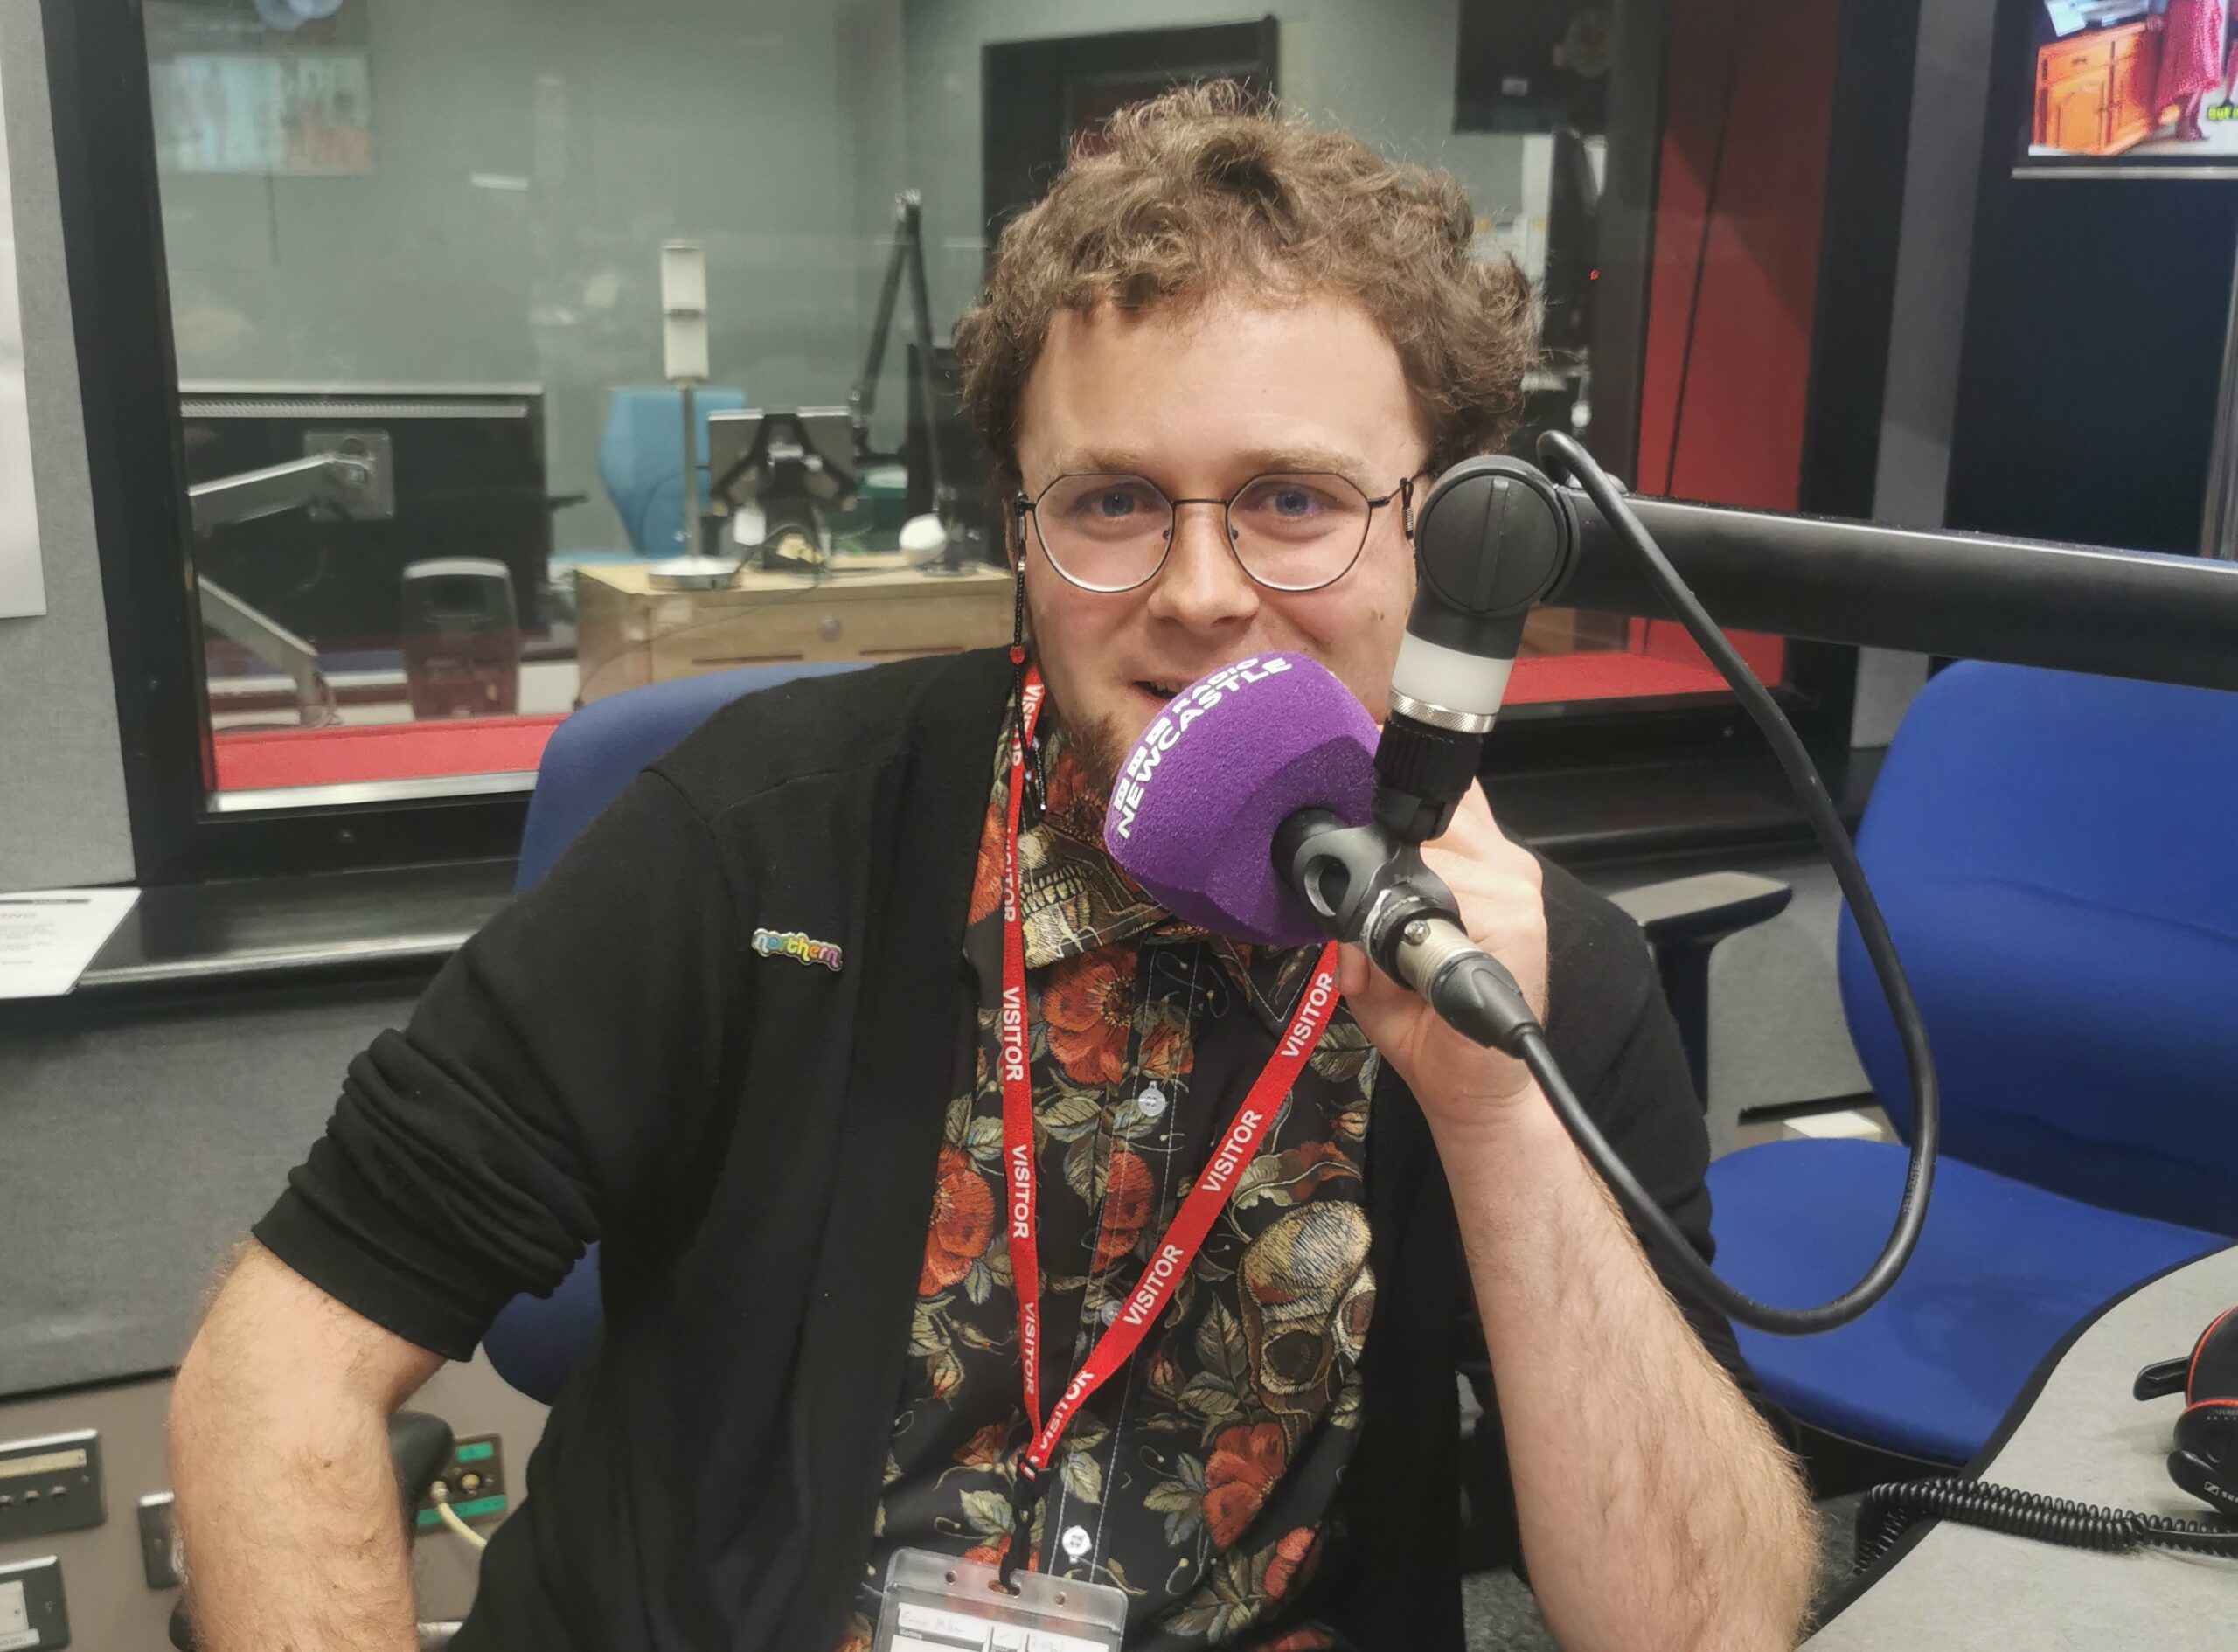 Lewis Brown (a young white man with curly hair and round glasses, wearing a black cardigan and a colorful shirt with roses and skulls) is speaking into a microphone with the words BBC Radio Newcastle written on it